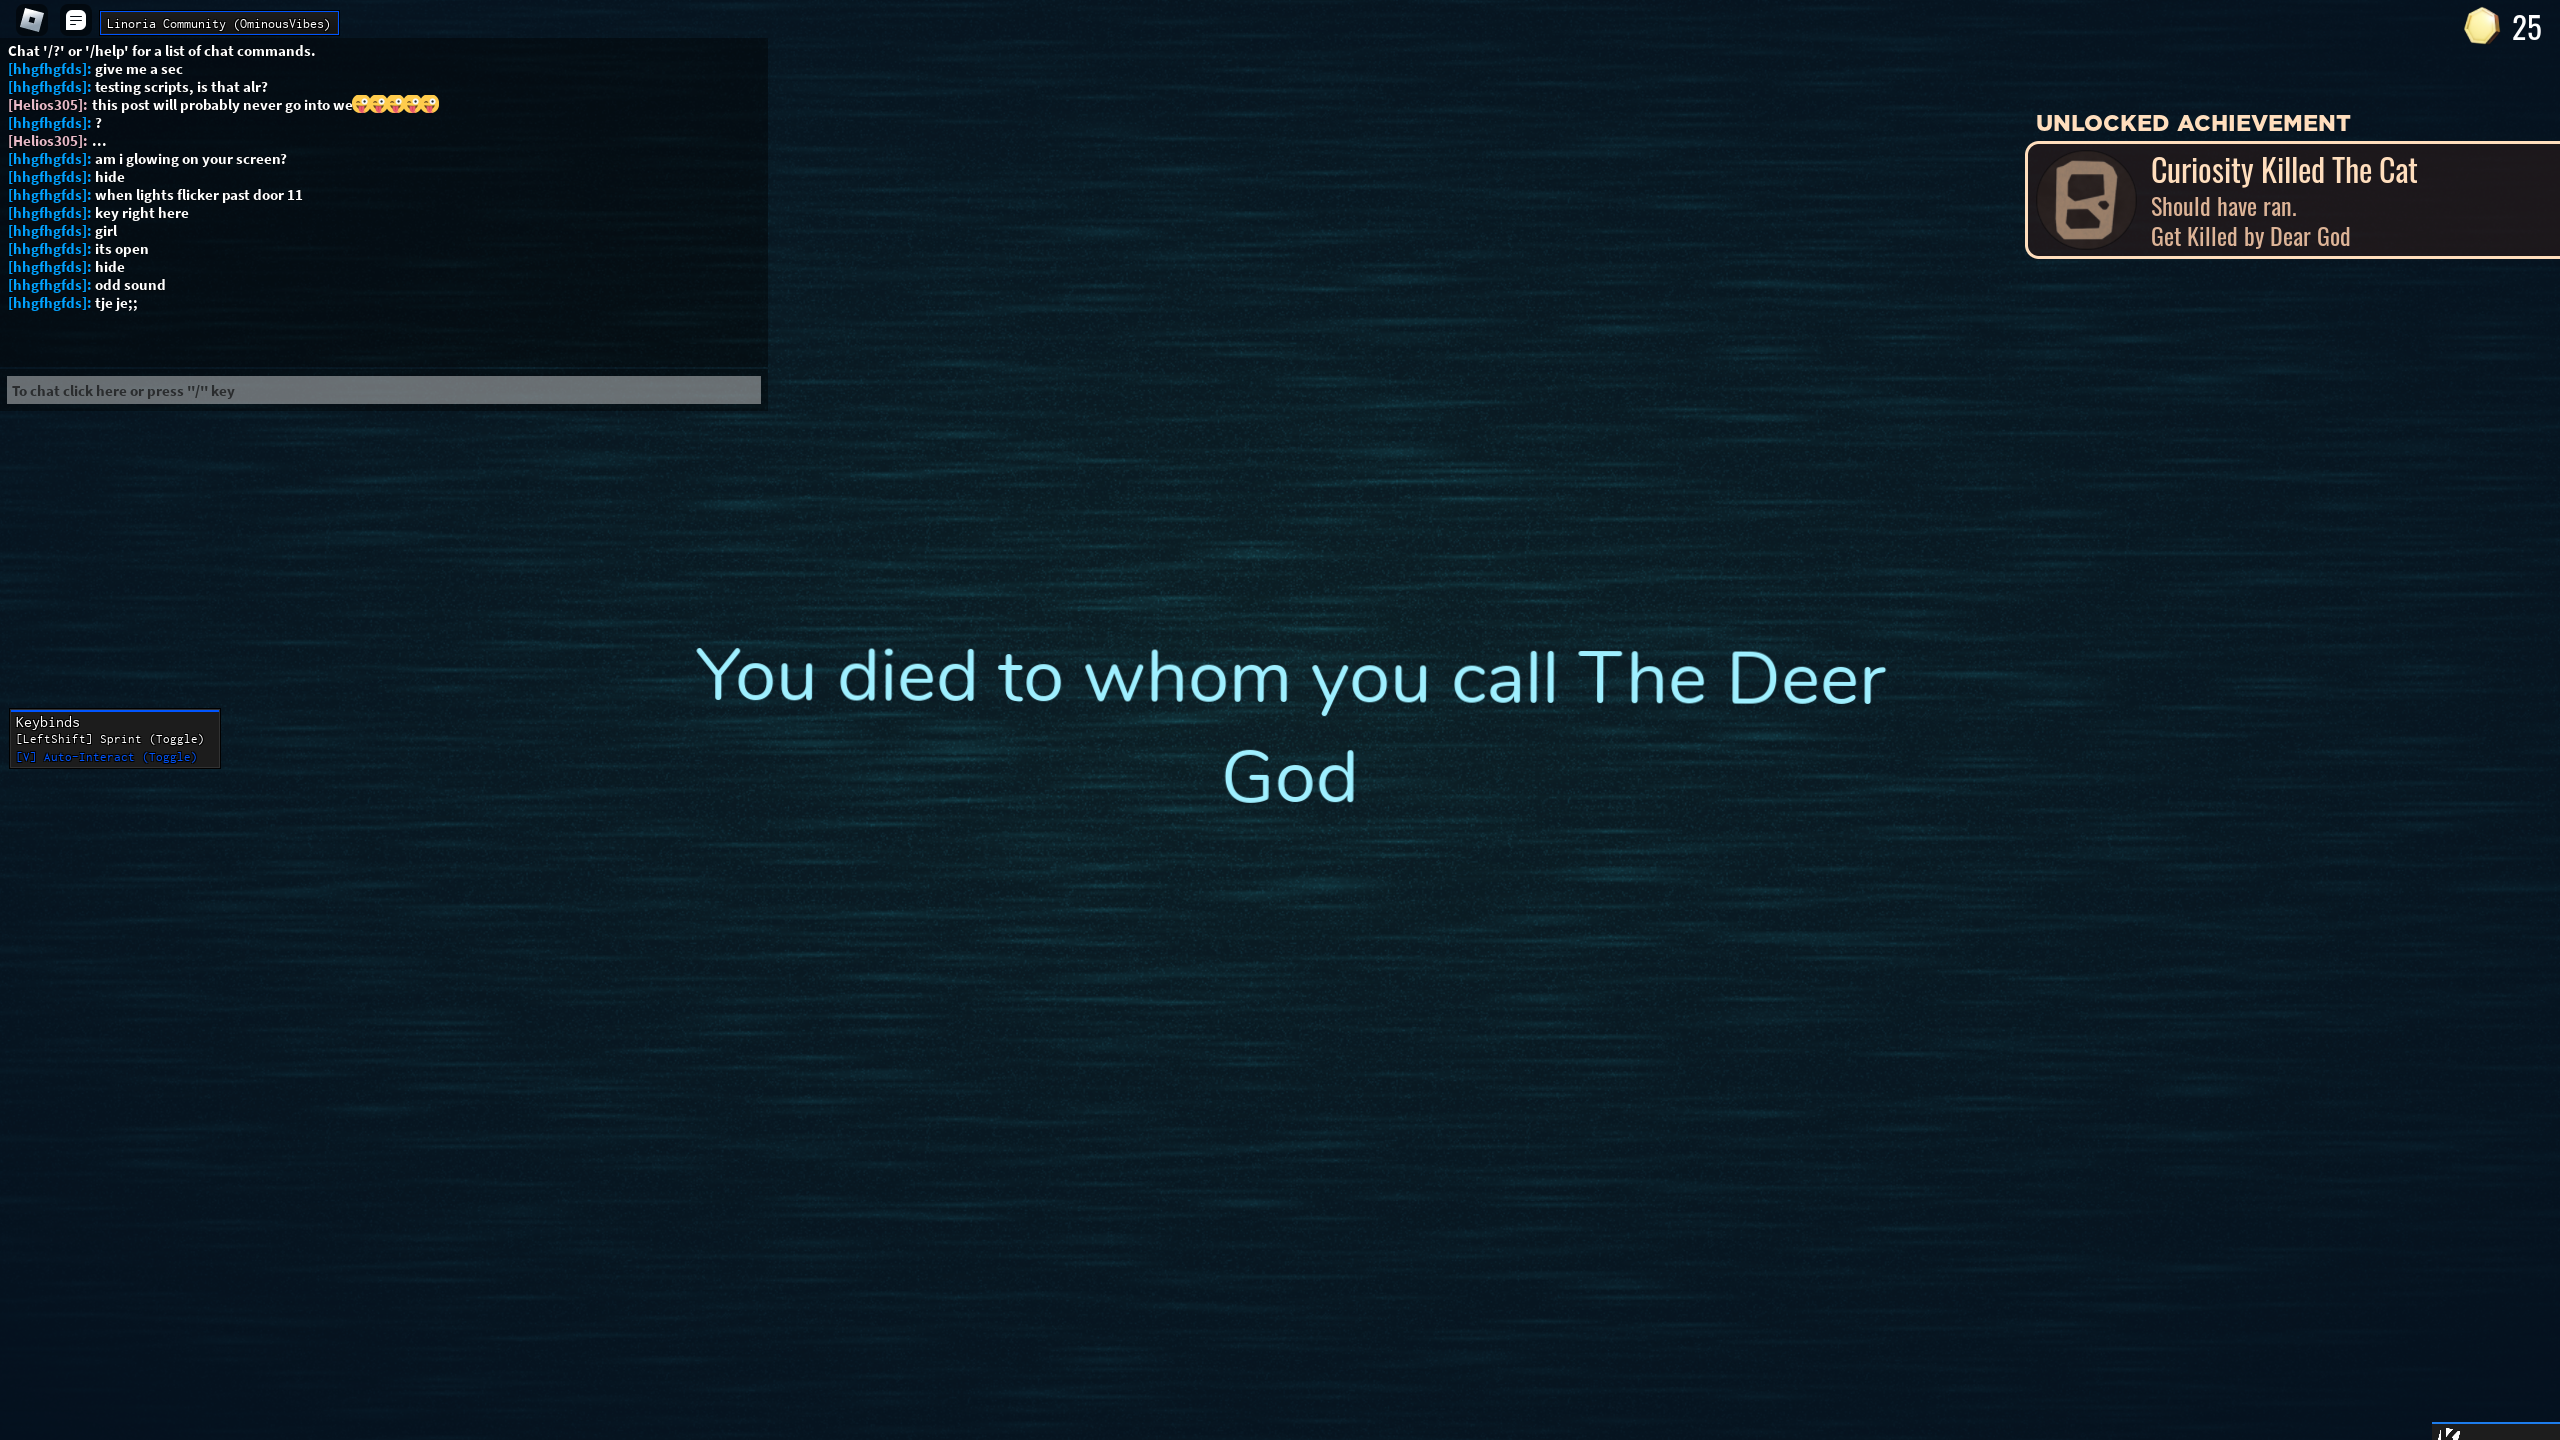 so, what the hell is The Deer God in doors?